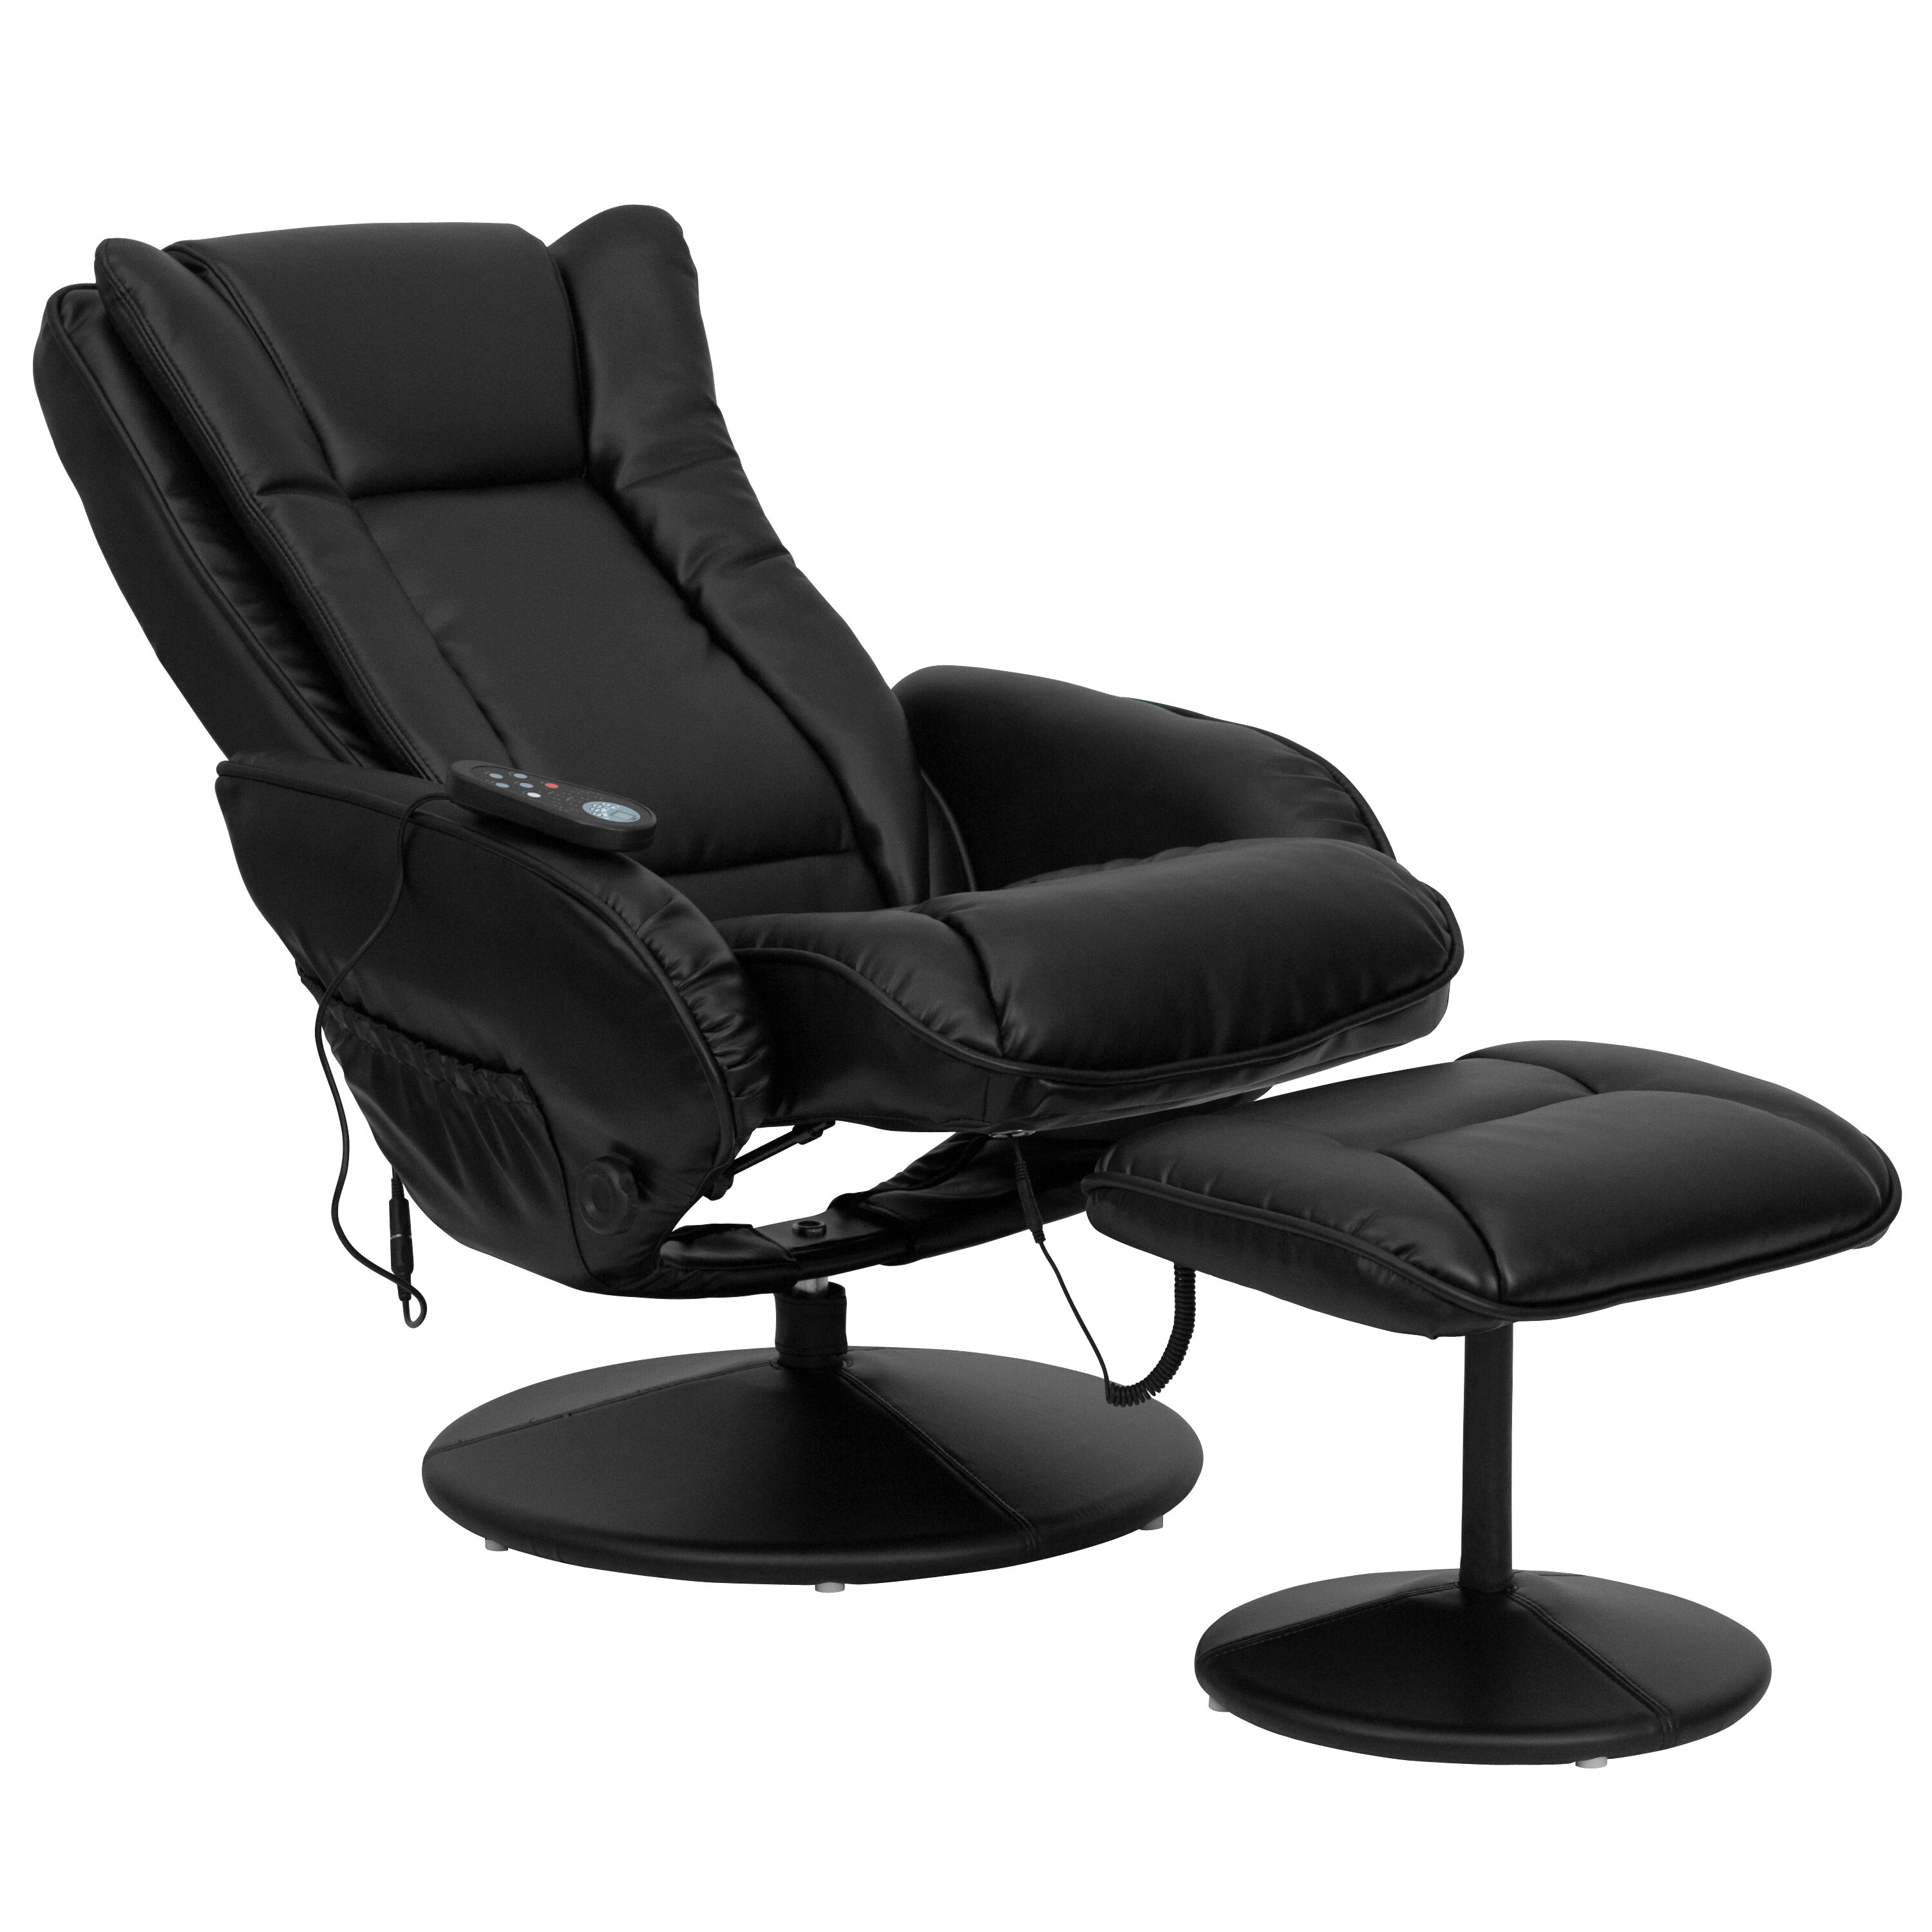 Faux Leather Adjustable Width Massage Chair Ottoman